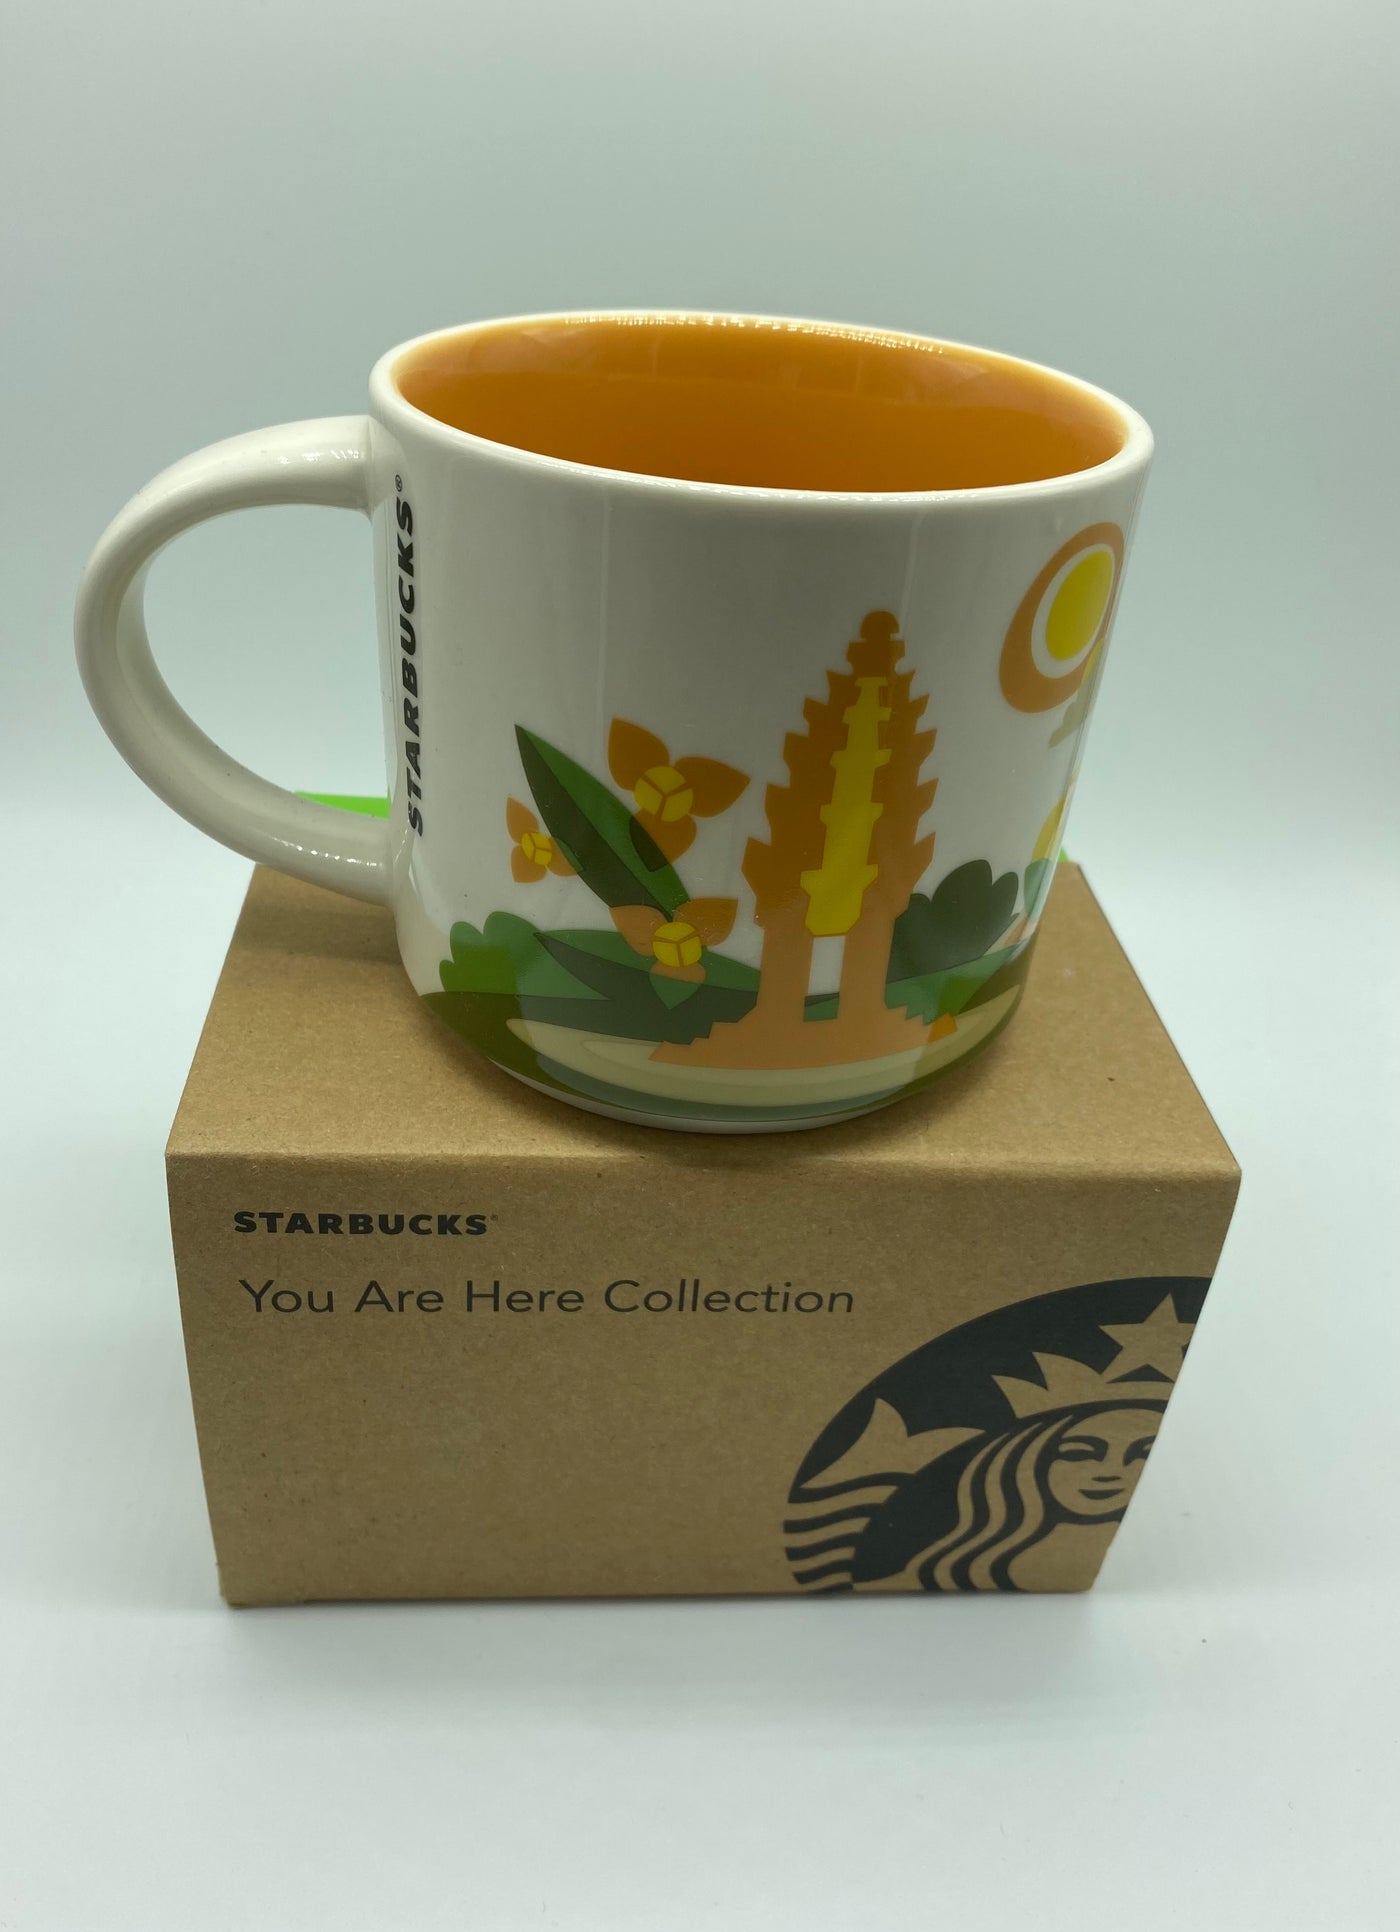 Starbucks You Are Here Collection Phnom Penh Cambodia Coffee Mug New with Box